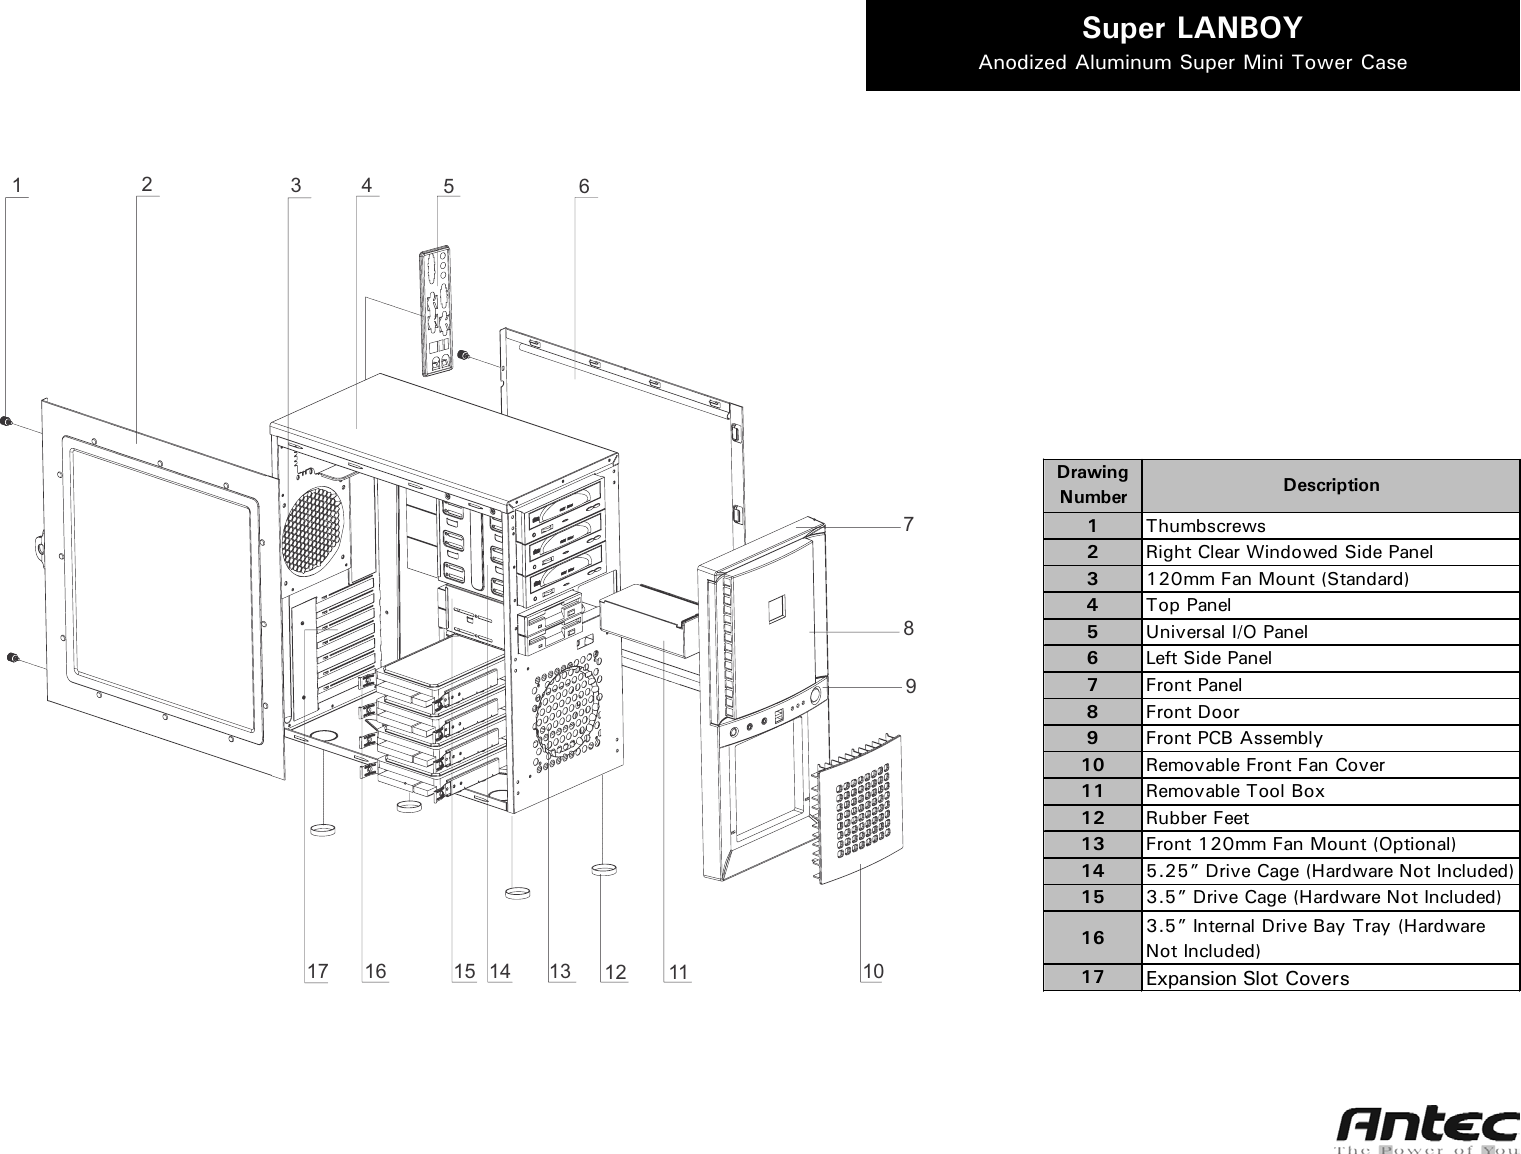 Page 5 of 5 - Antec Antec-Super-Lanboy-Users-Manual- SuperLanBoy_Manual_intl  Antec-super-lanboy-users-manual